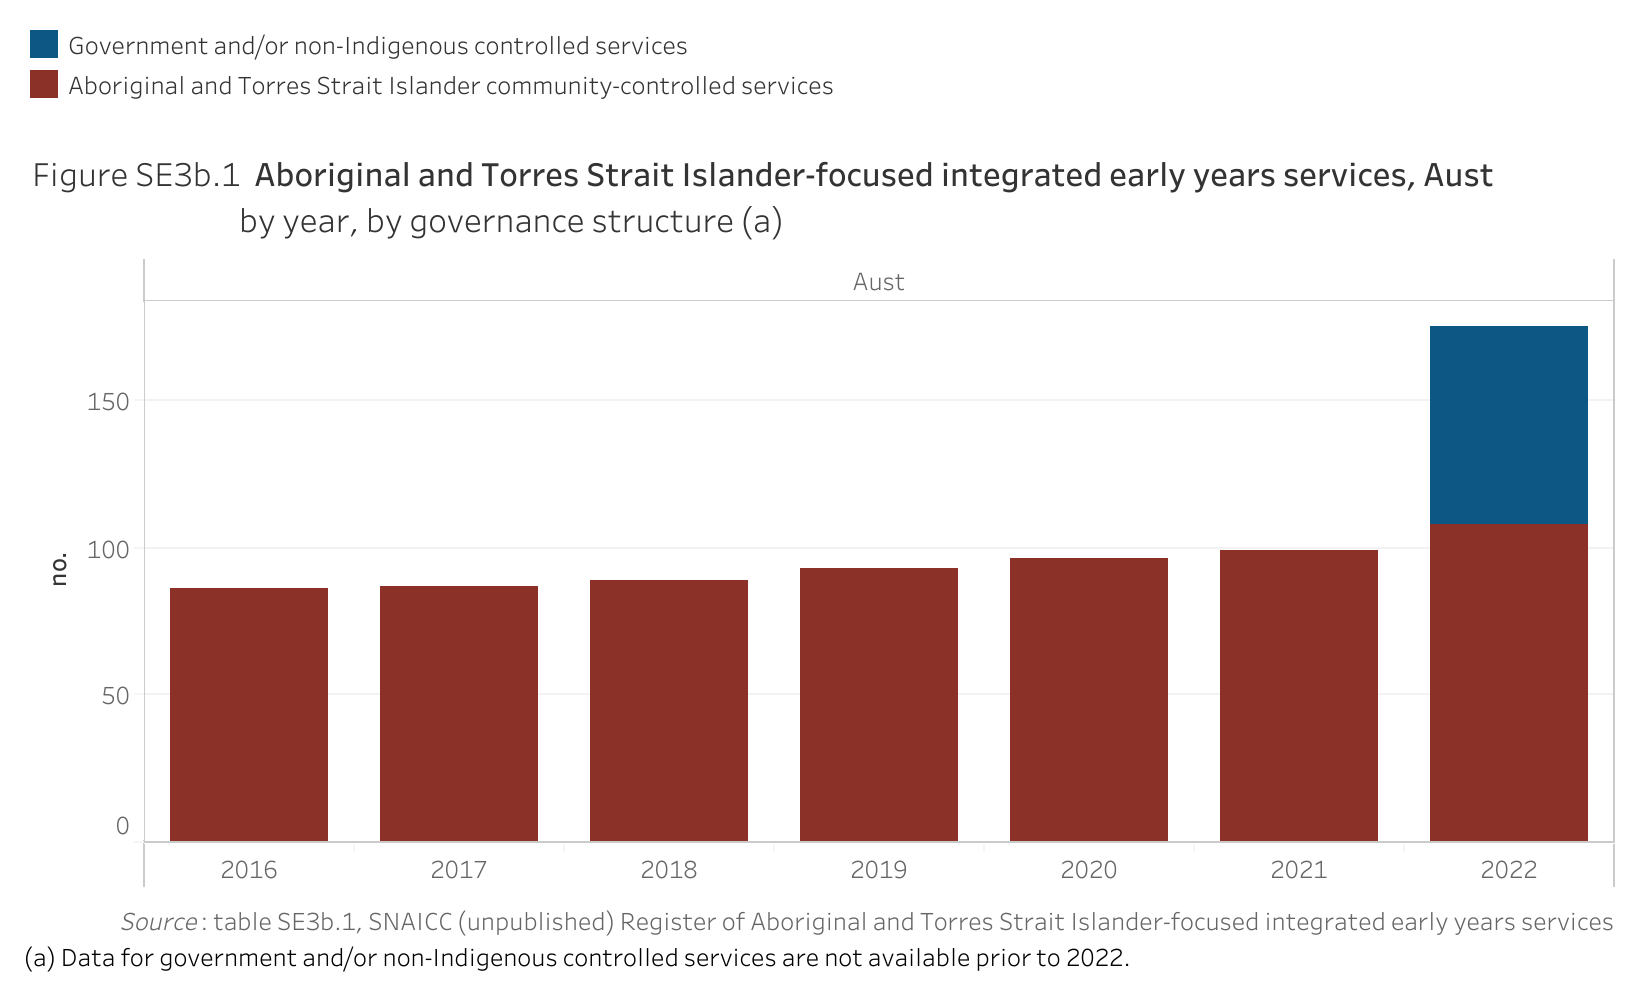 Figure SE3b.1 shows Aboriginal and Torres Strait Islander-focused integrated early years services, Australia, by year, by governance structure. More details can be found within the text near this image.